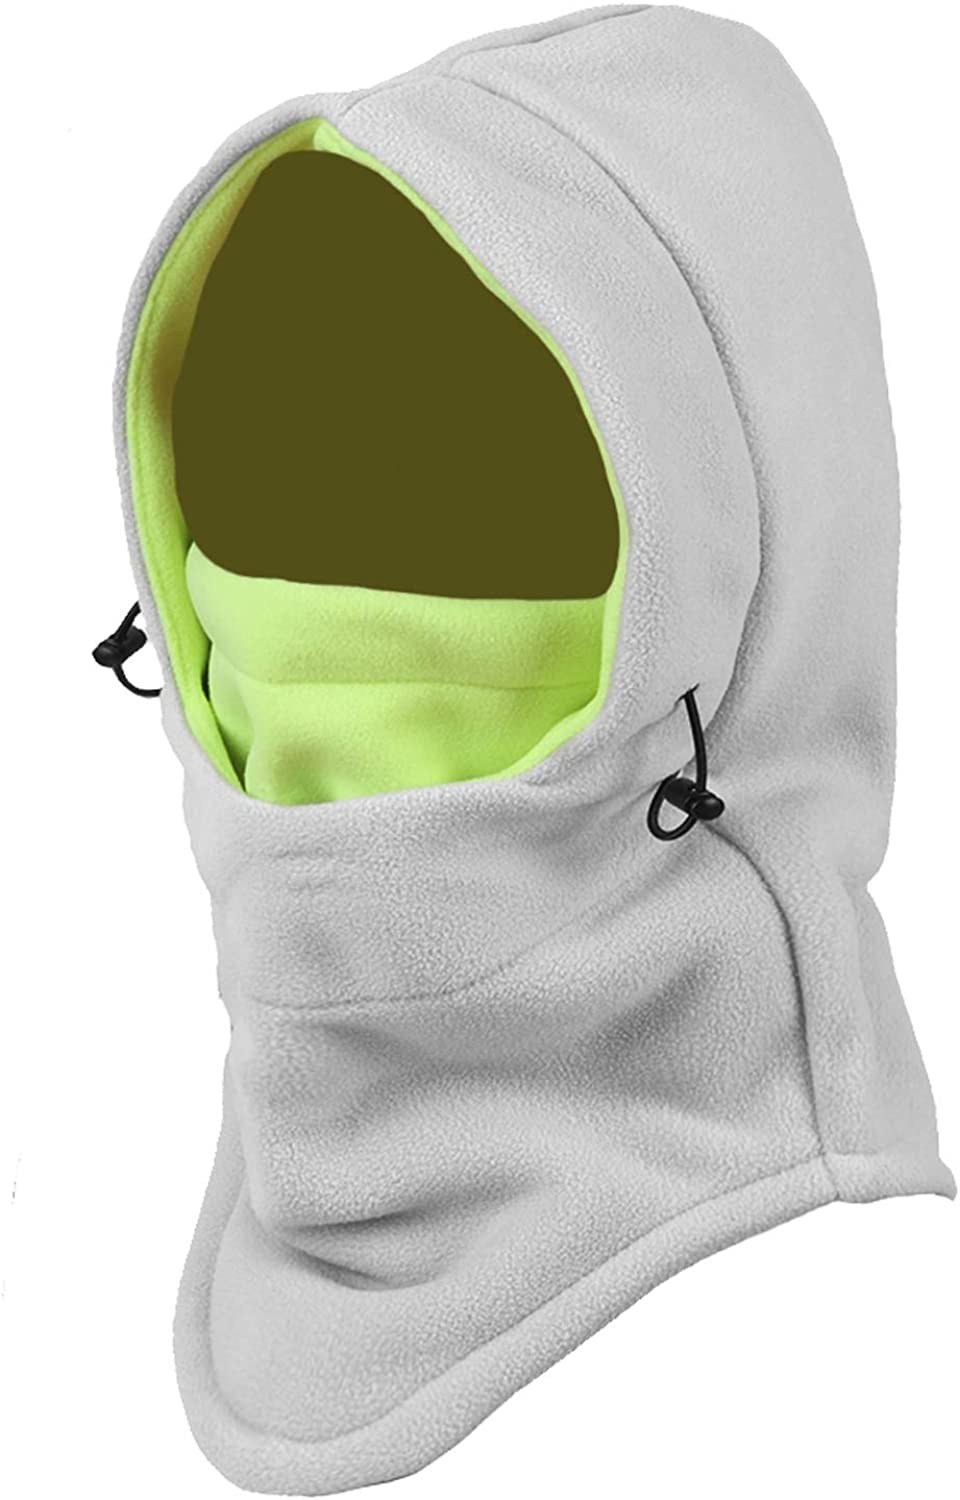 Blue Multipurpose Use Thermal Fleece Hooded Balaclava Warm Ski Bike Wind Stopper Full Face Mask Neck Warmer for Winter Outdoor Activities 